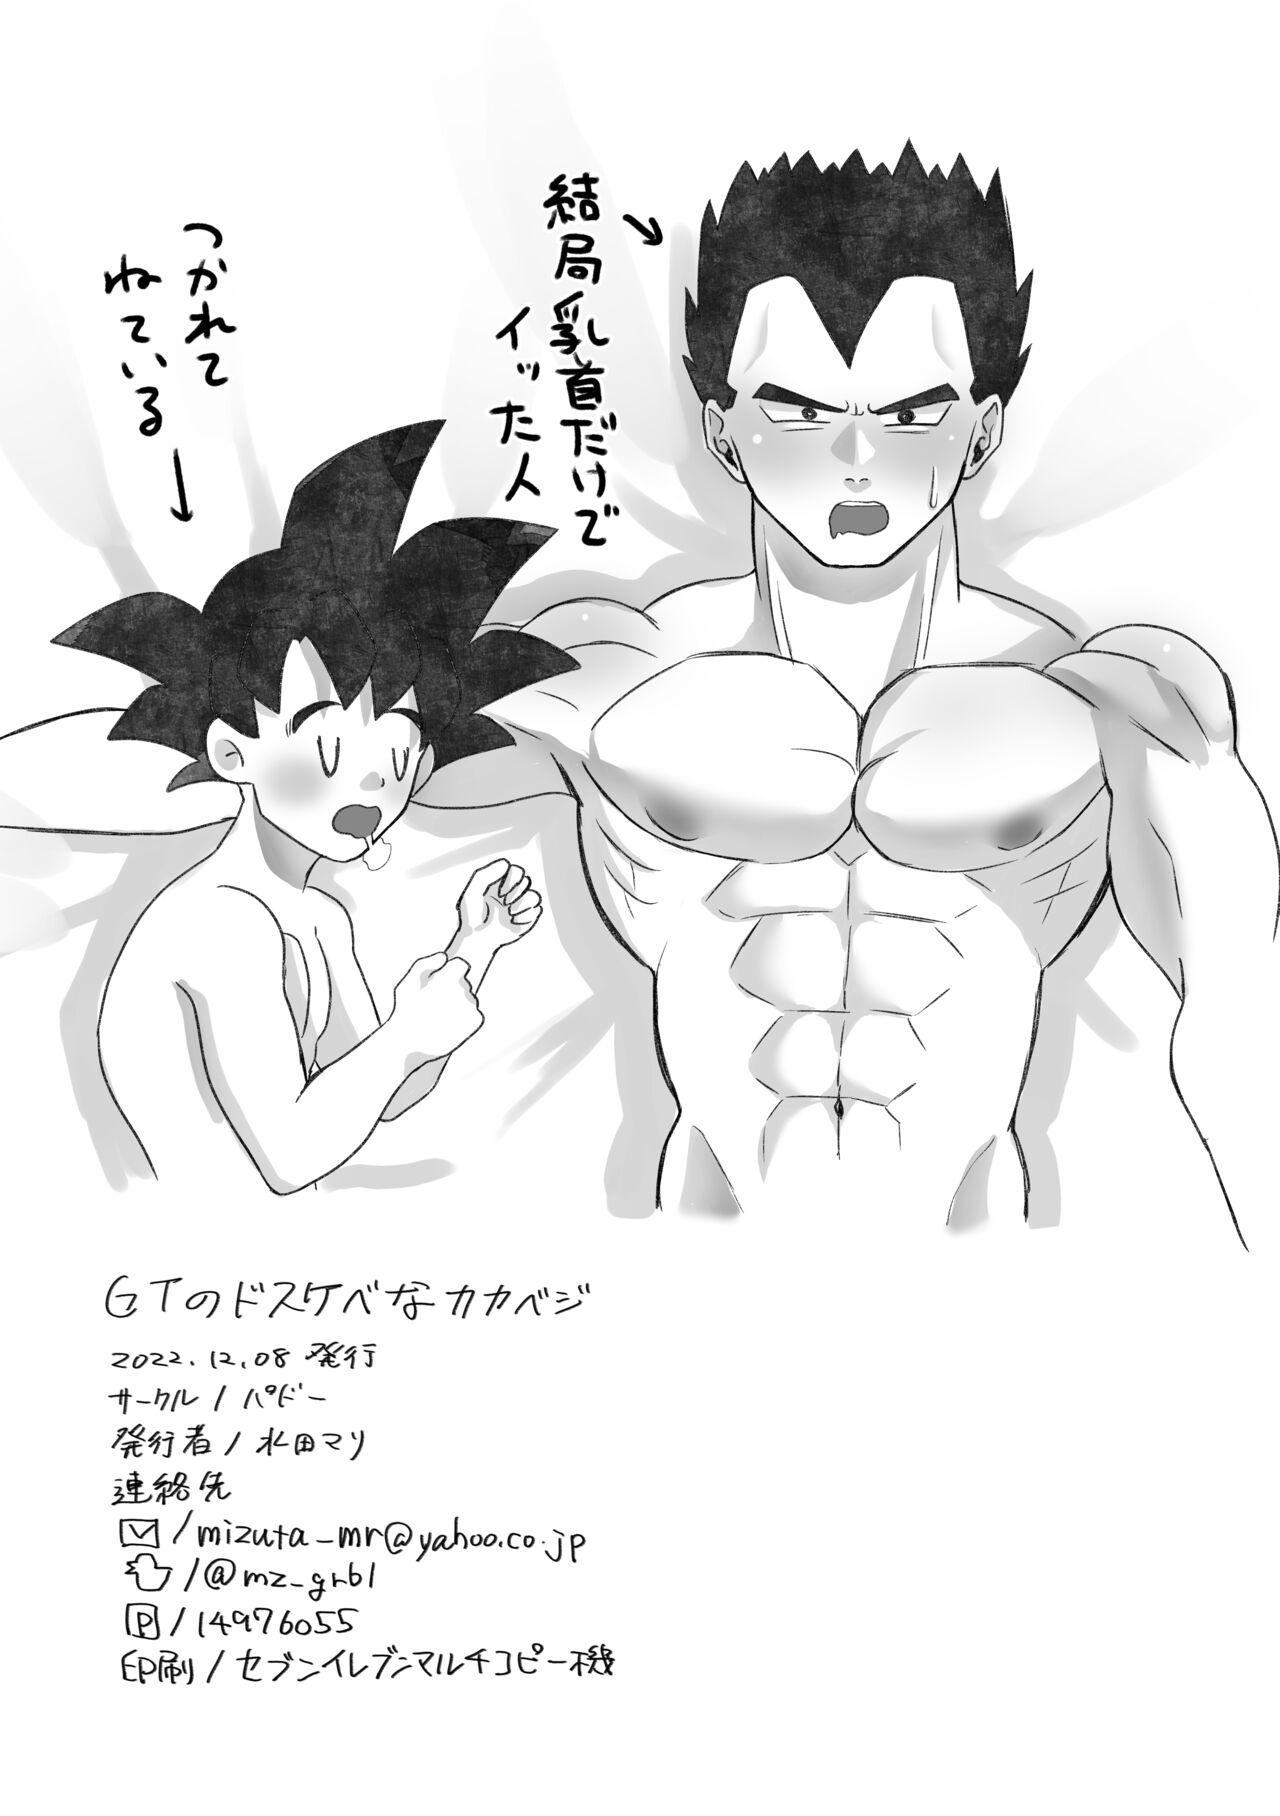 Best Blowjob Ever GT no Dosukebe na KakaVege - Dragon ball gt Fake - Page 9